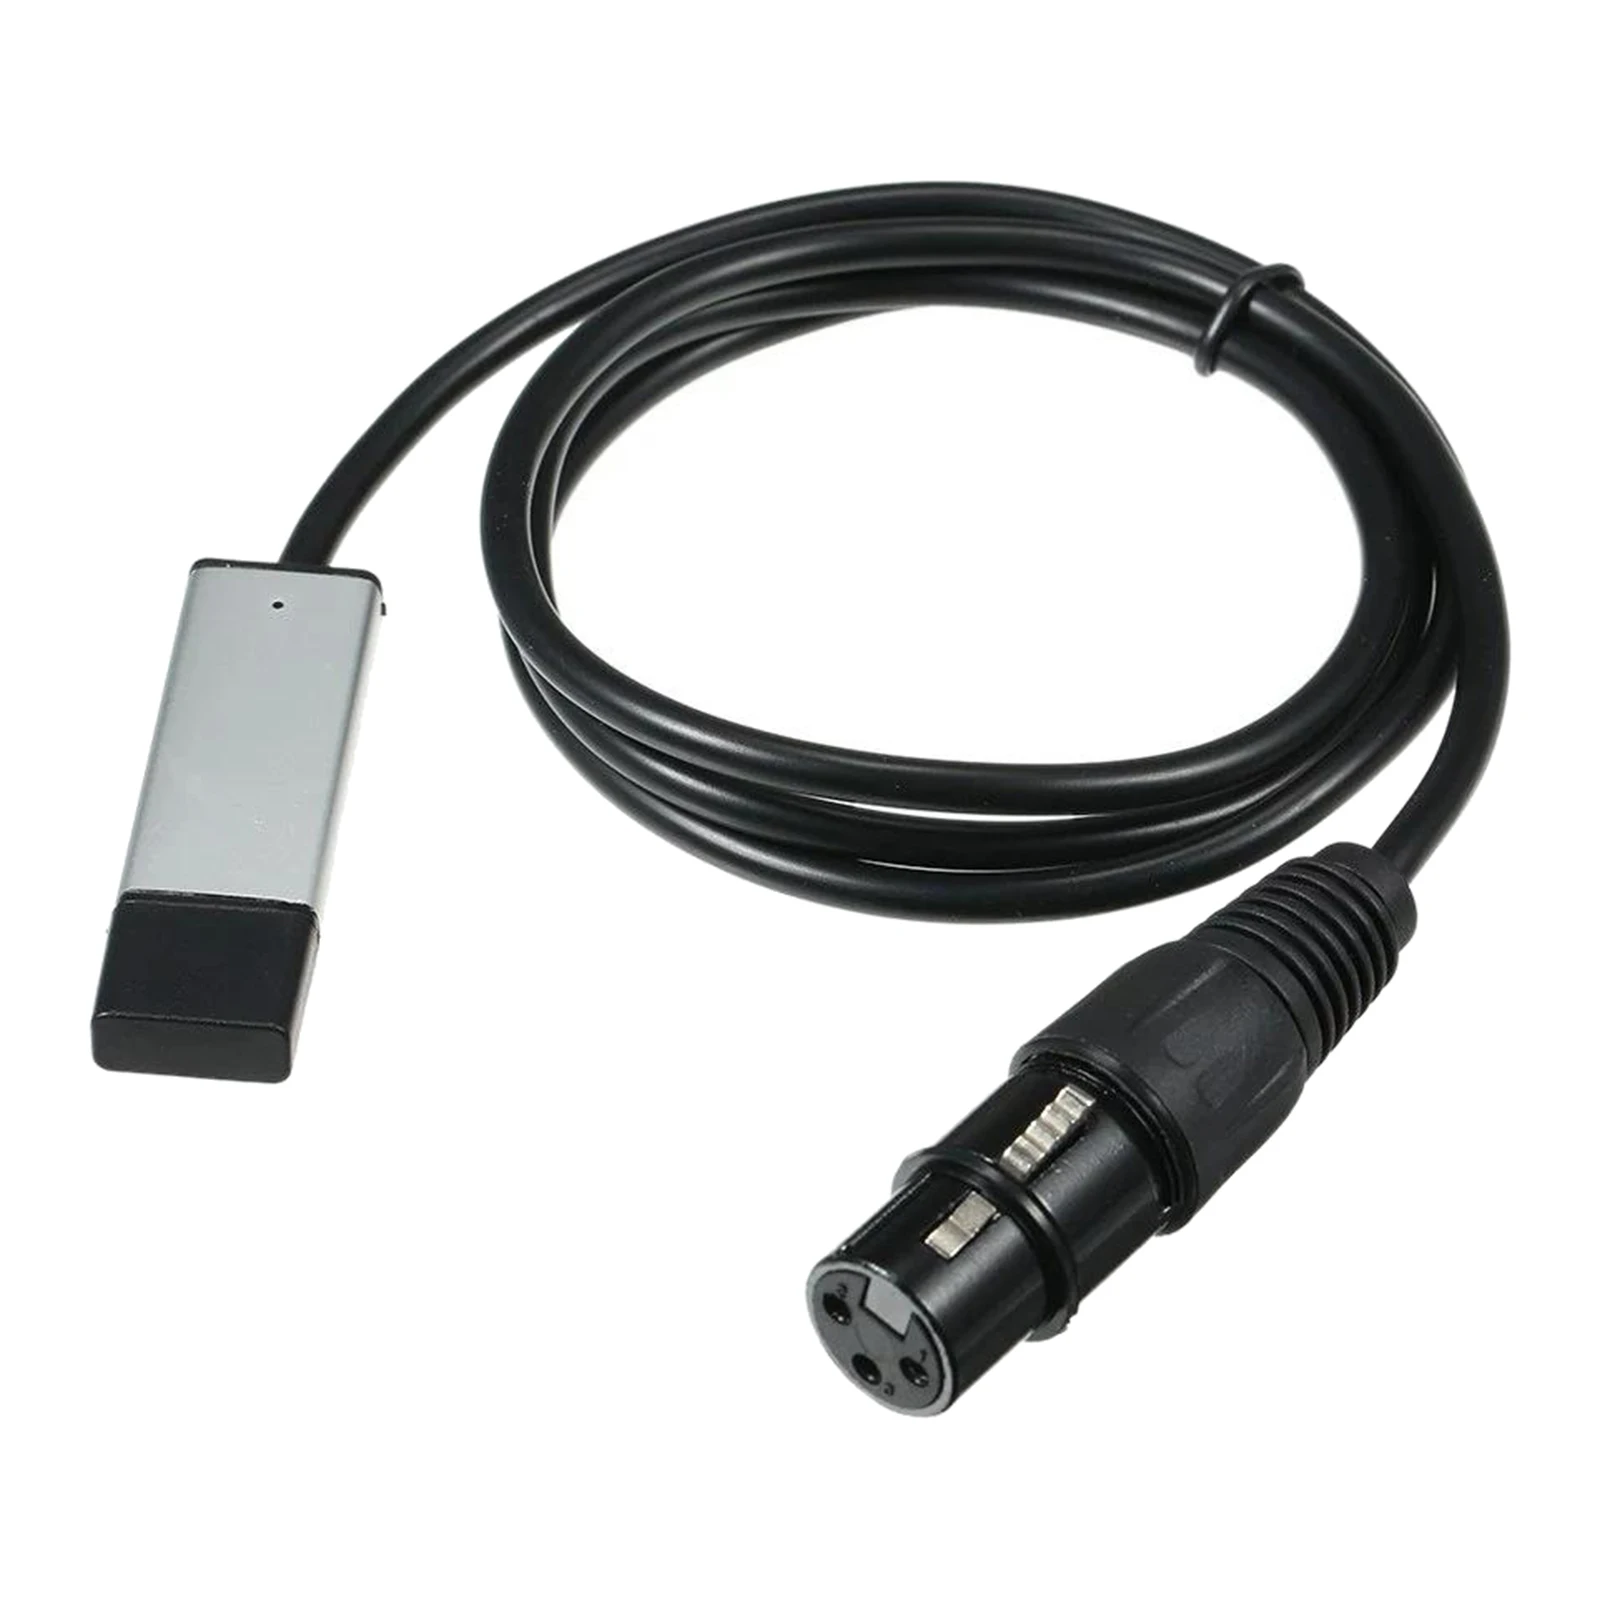 USB to DMX Control Interface Adapter Cable for Stage Lighting DMX512 Cable High Performance Portable